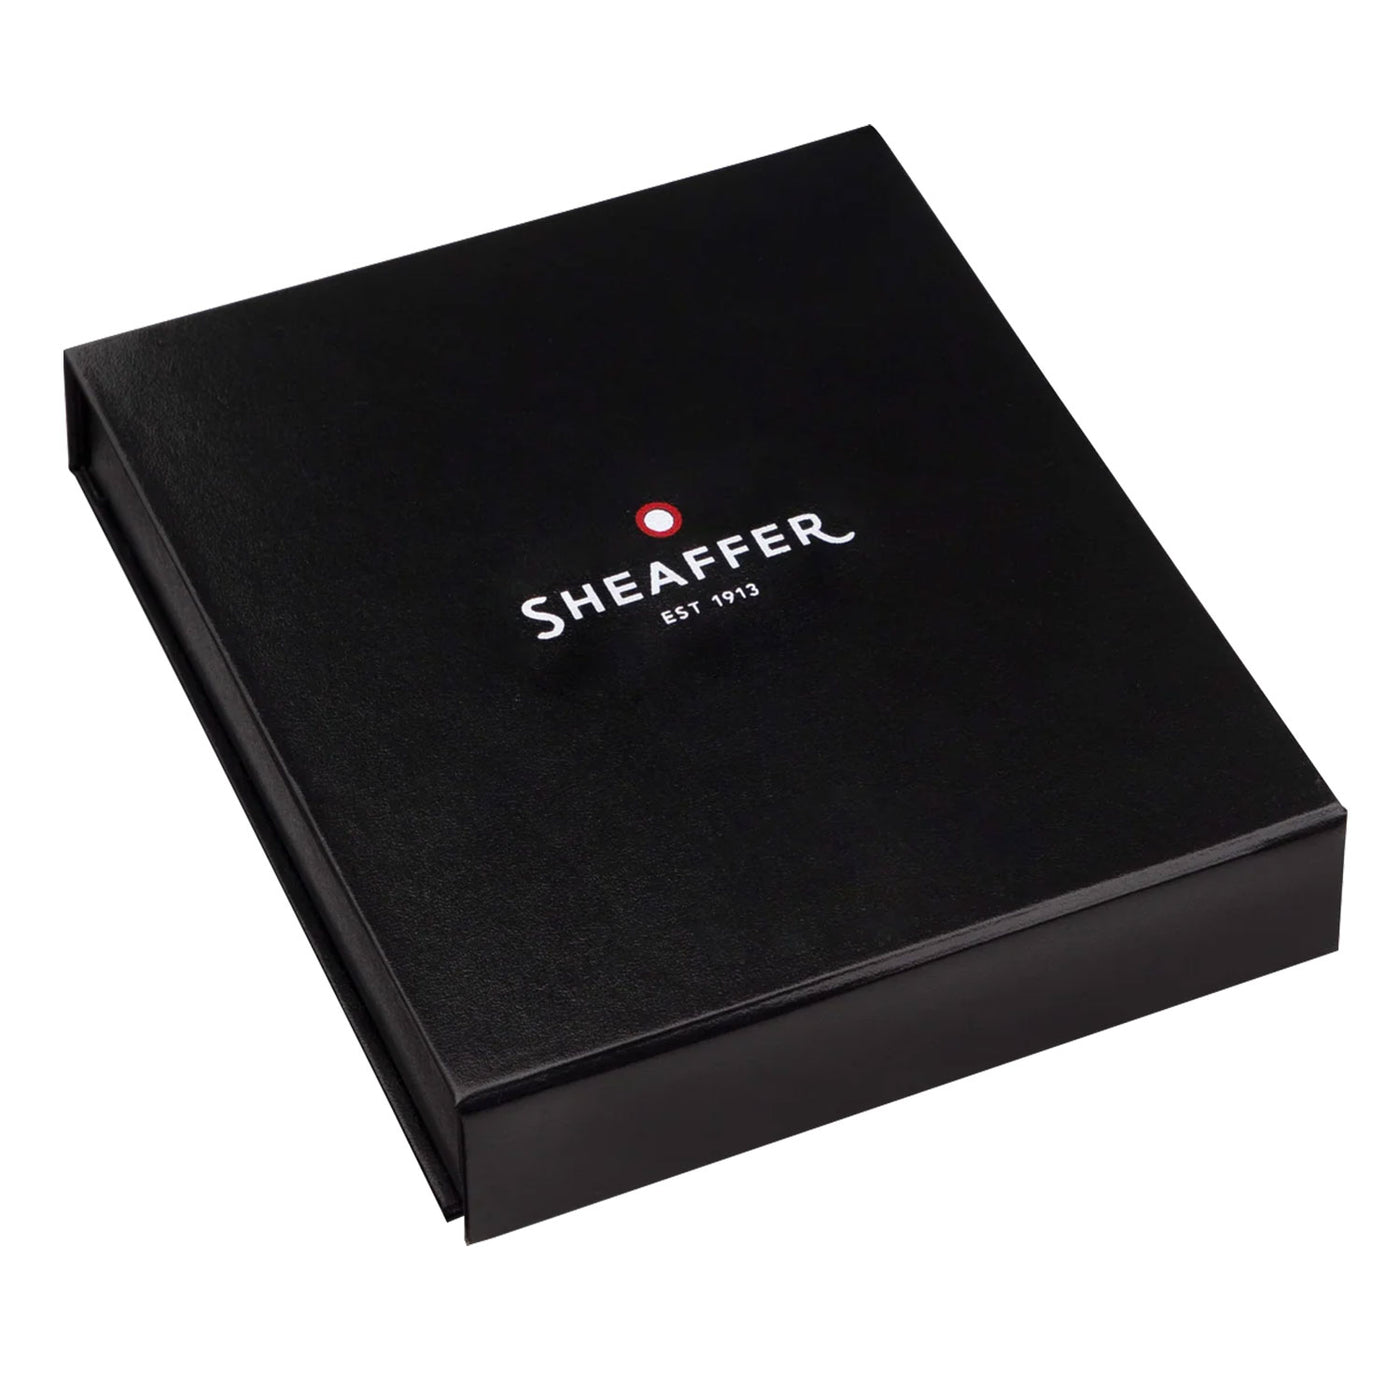 Sheaffer Gift Set - VFM Excessive Red Ball Pen with A6 Black Notebook 7